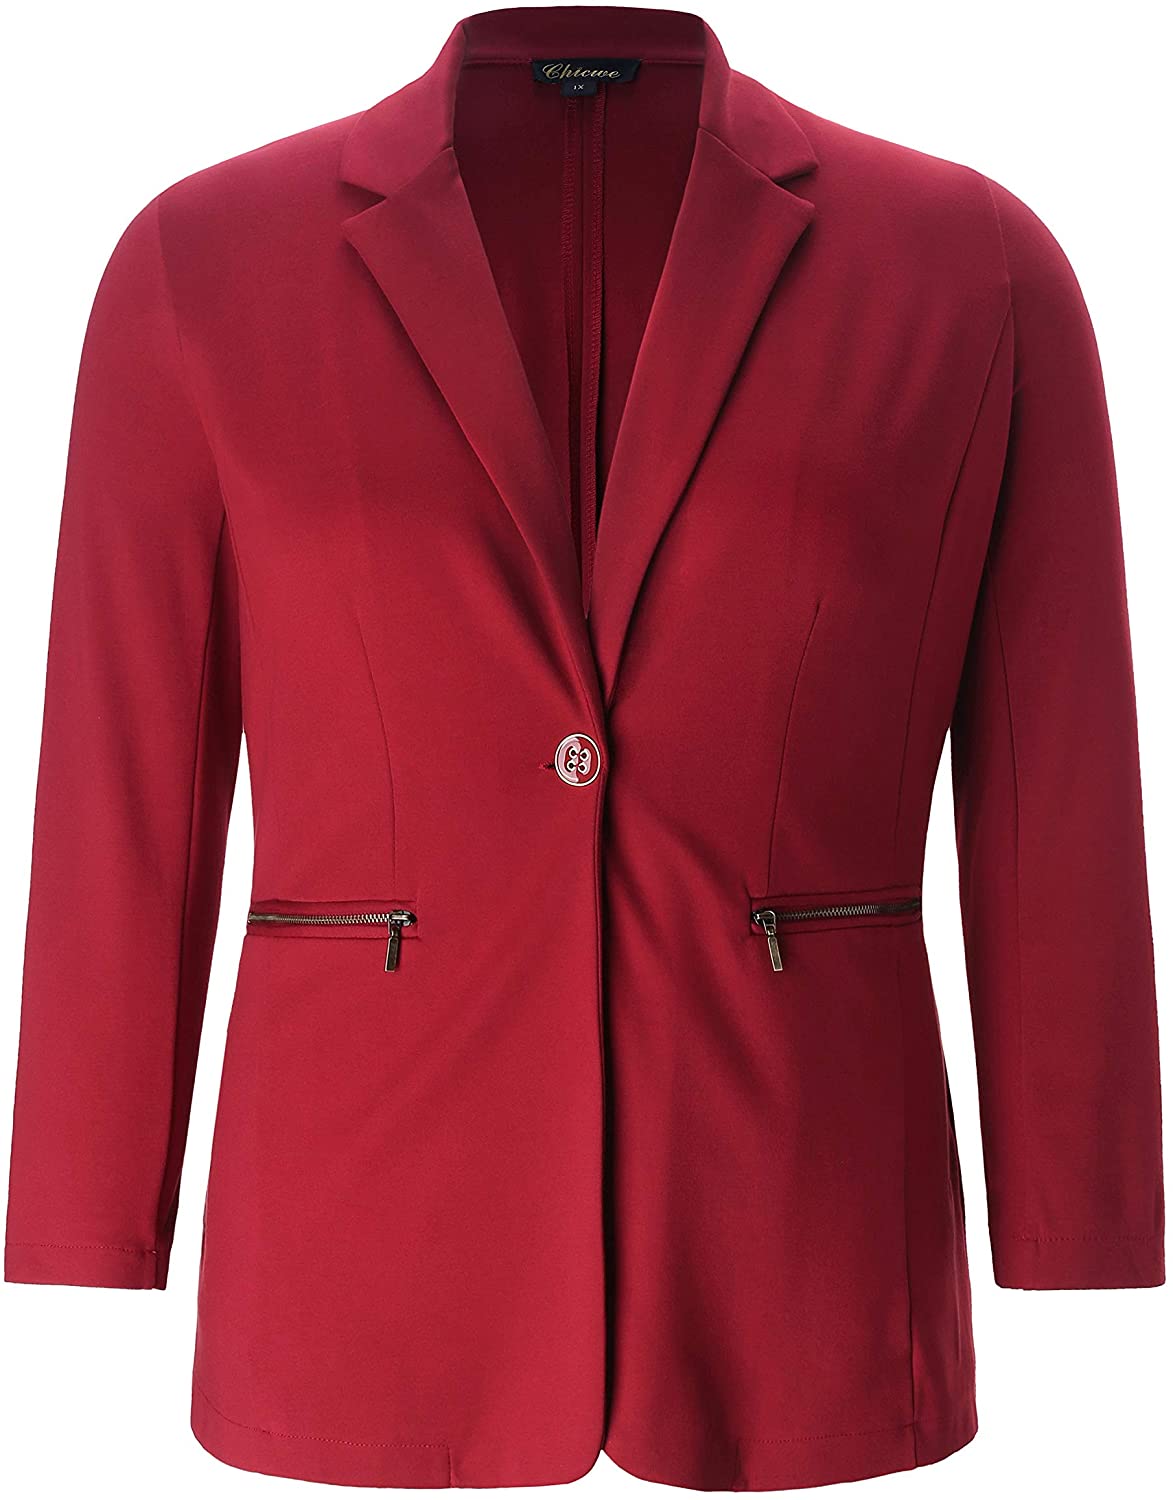 Chicwe Womens Plus Size Stretch Soft Unstructured Blazer with Zipped Pockets Button Closure